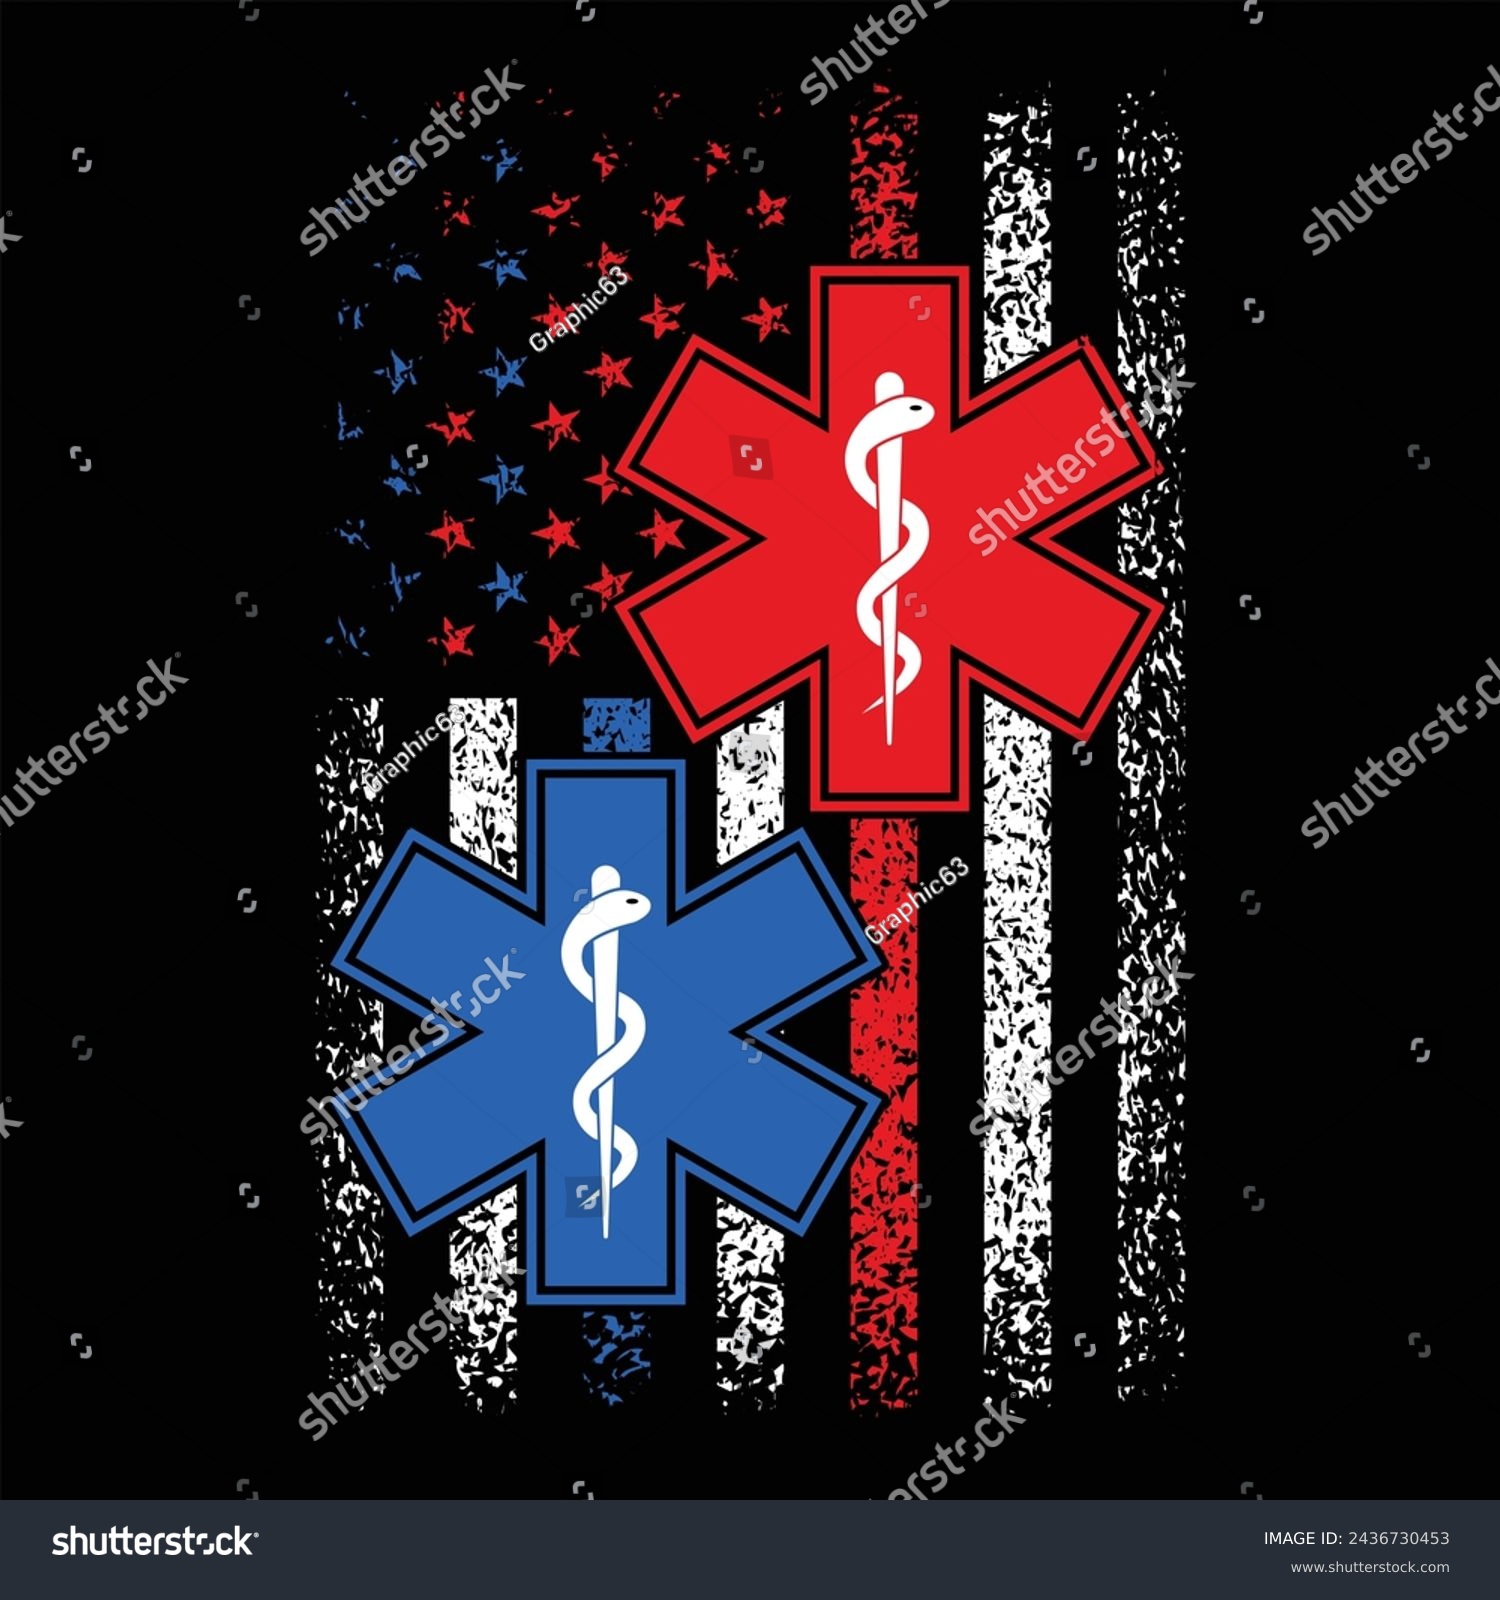 SVG of National First Responders.I Support First Responders.Distressed American Flag Firefighter Police Emergency Medical Service T Shirt,Poster,Backround Print Design Vector. svg